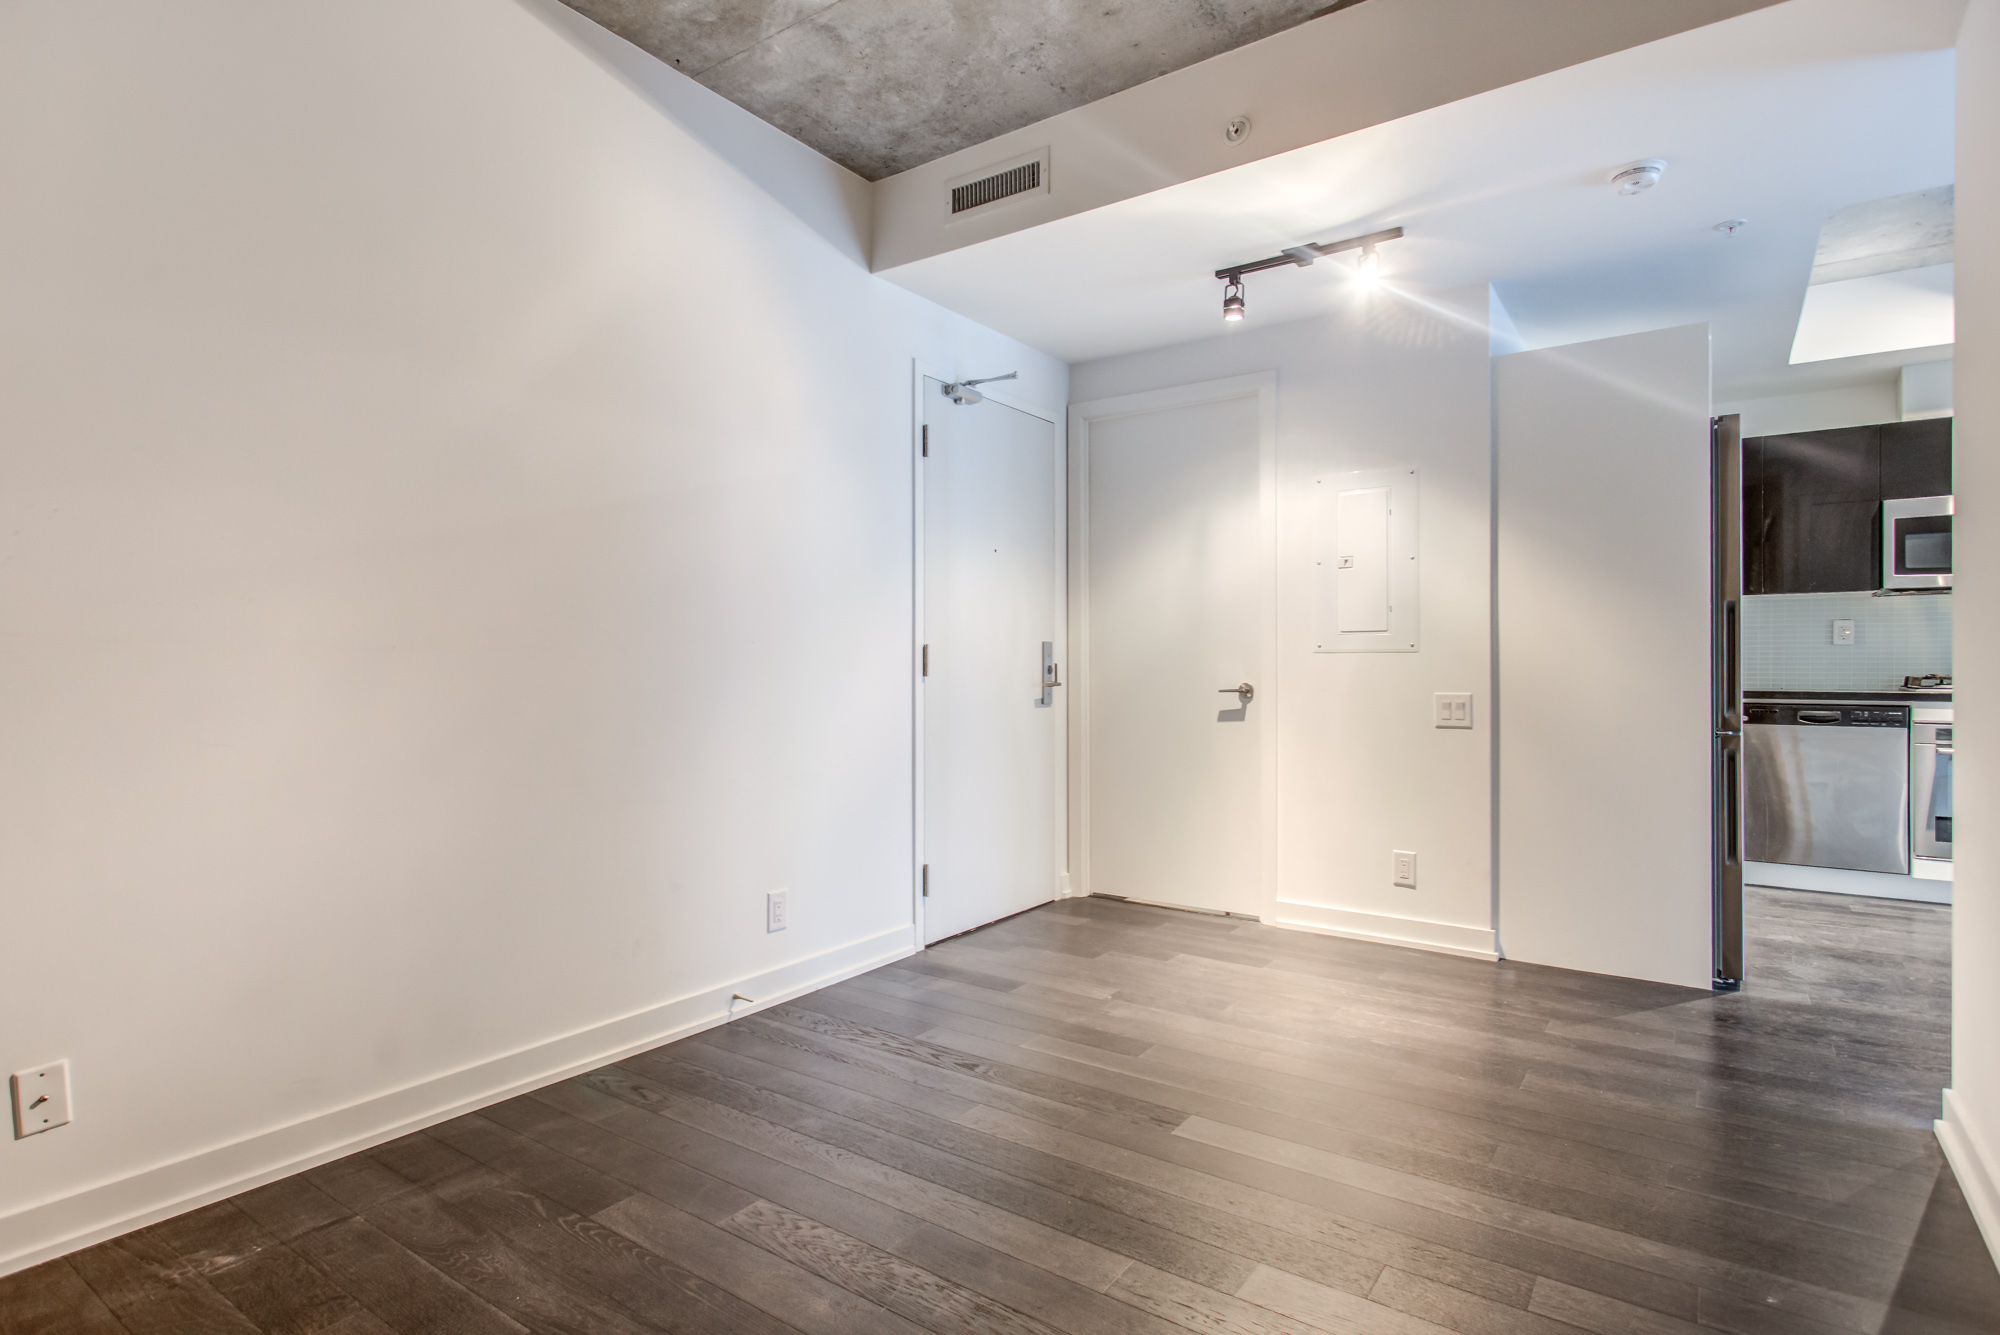 39 Brant St Unit 918, Brant Park Lofts, in Queen West, master bedroom with dark laminate floors and kitchen view.